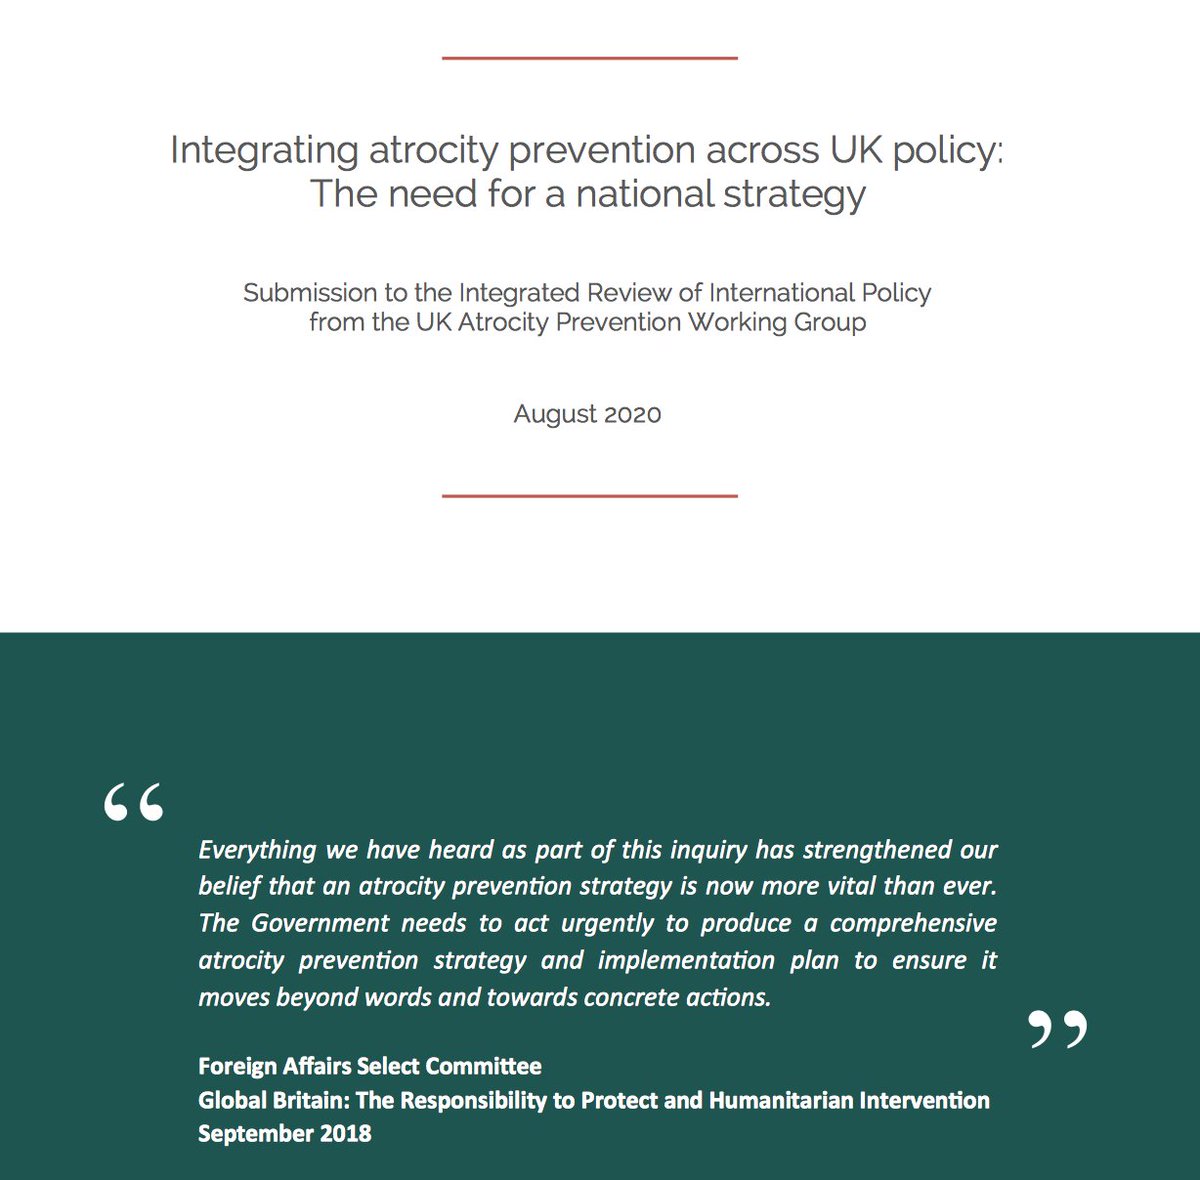 And that's exactly the point. I'd argue the Minister's response fairly reflects UK policy because it is precisely because that gap that is (still) unaddressed in UK policy. And is what urgently requires attention. See our sub to the Integrated Review:  https://protectionapproaches.org/news/f/submission-to-the-integrated-review-of-uk-international-policy